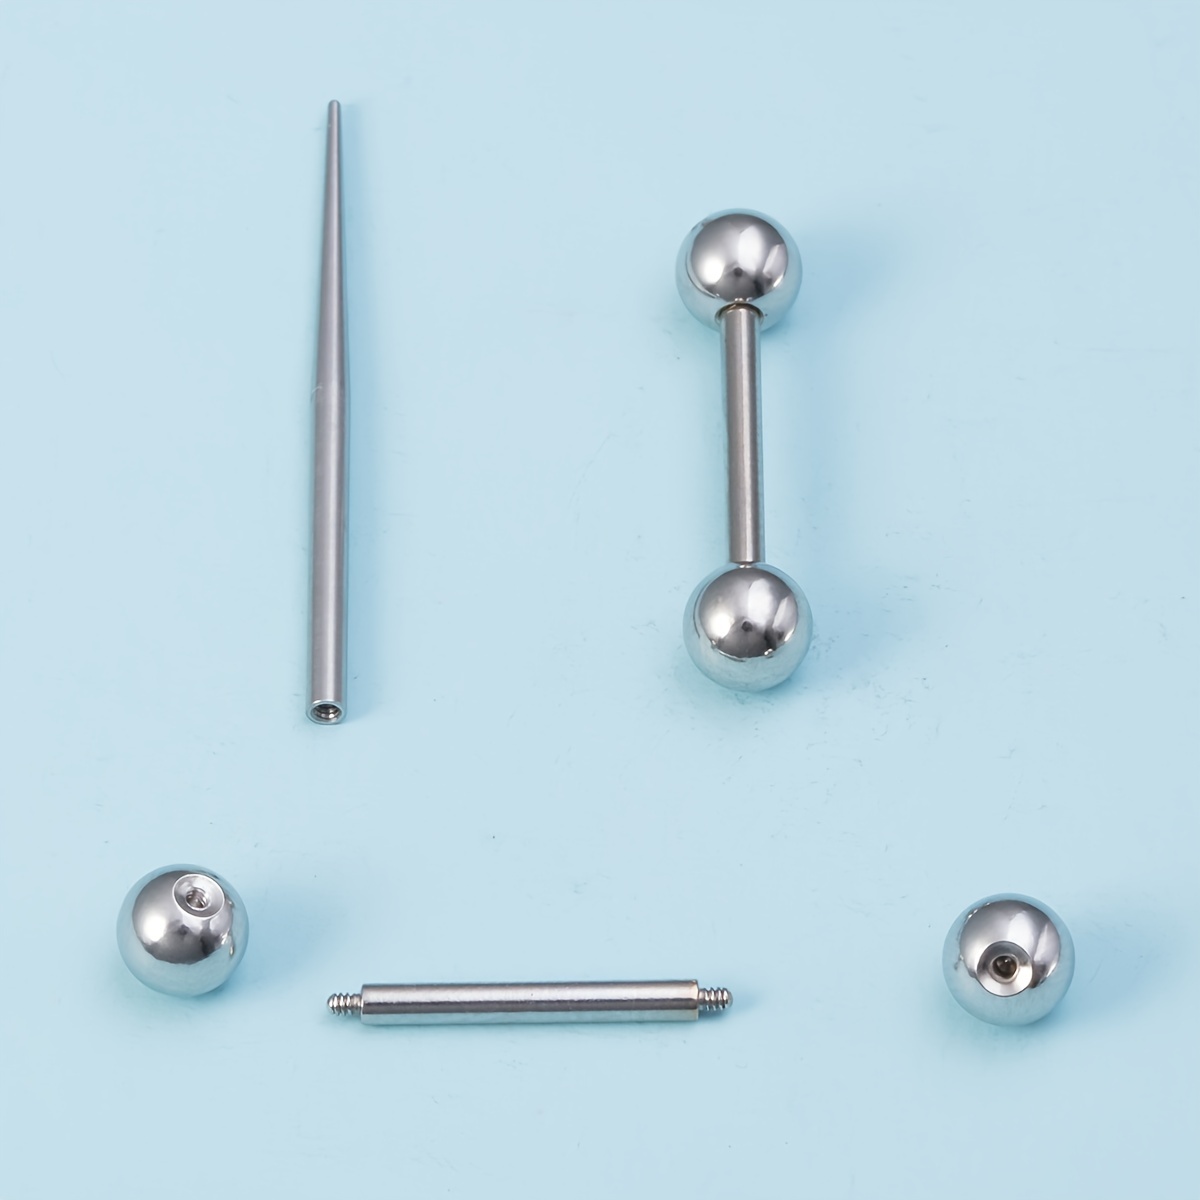 Tools Threaded Tapers - Anatometal : highest quality body piercing jewelry.